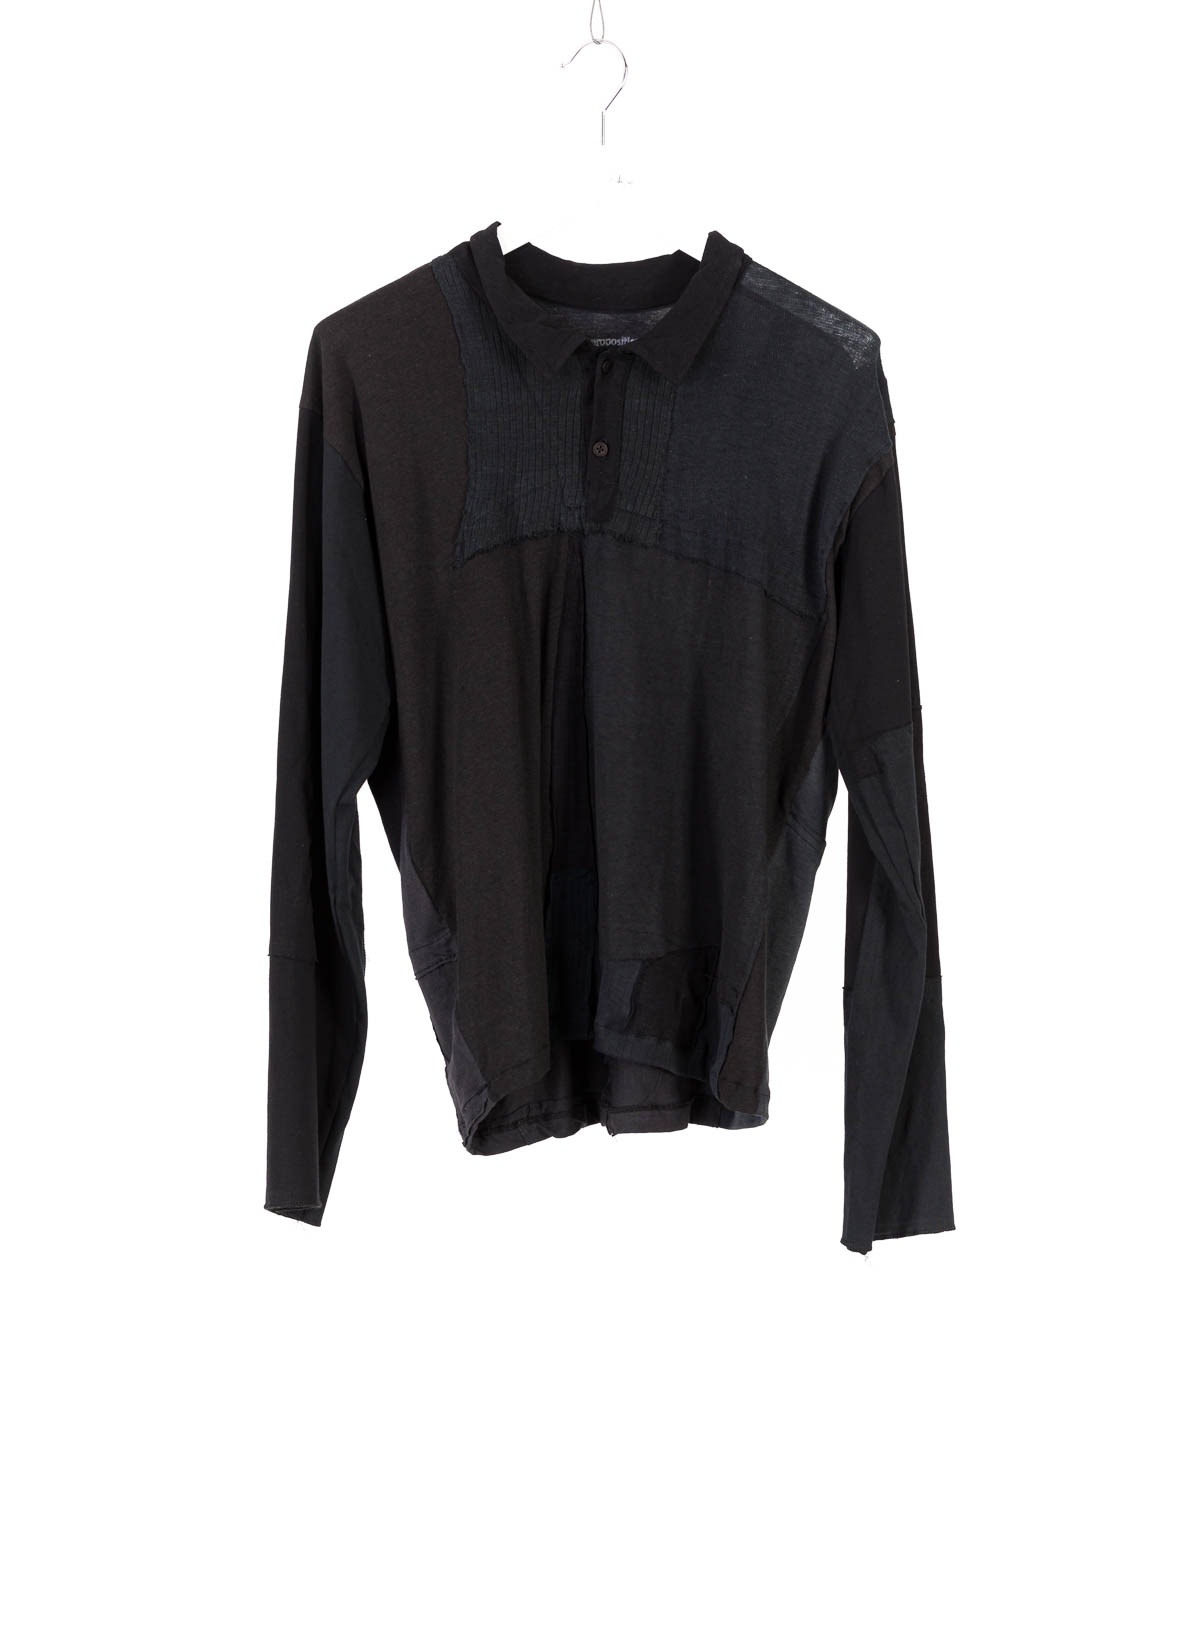 hide-m | PROPOSITION CLOTHING Polo Shirt long sleeve black